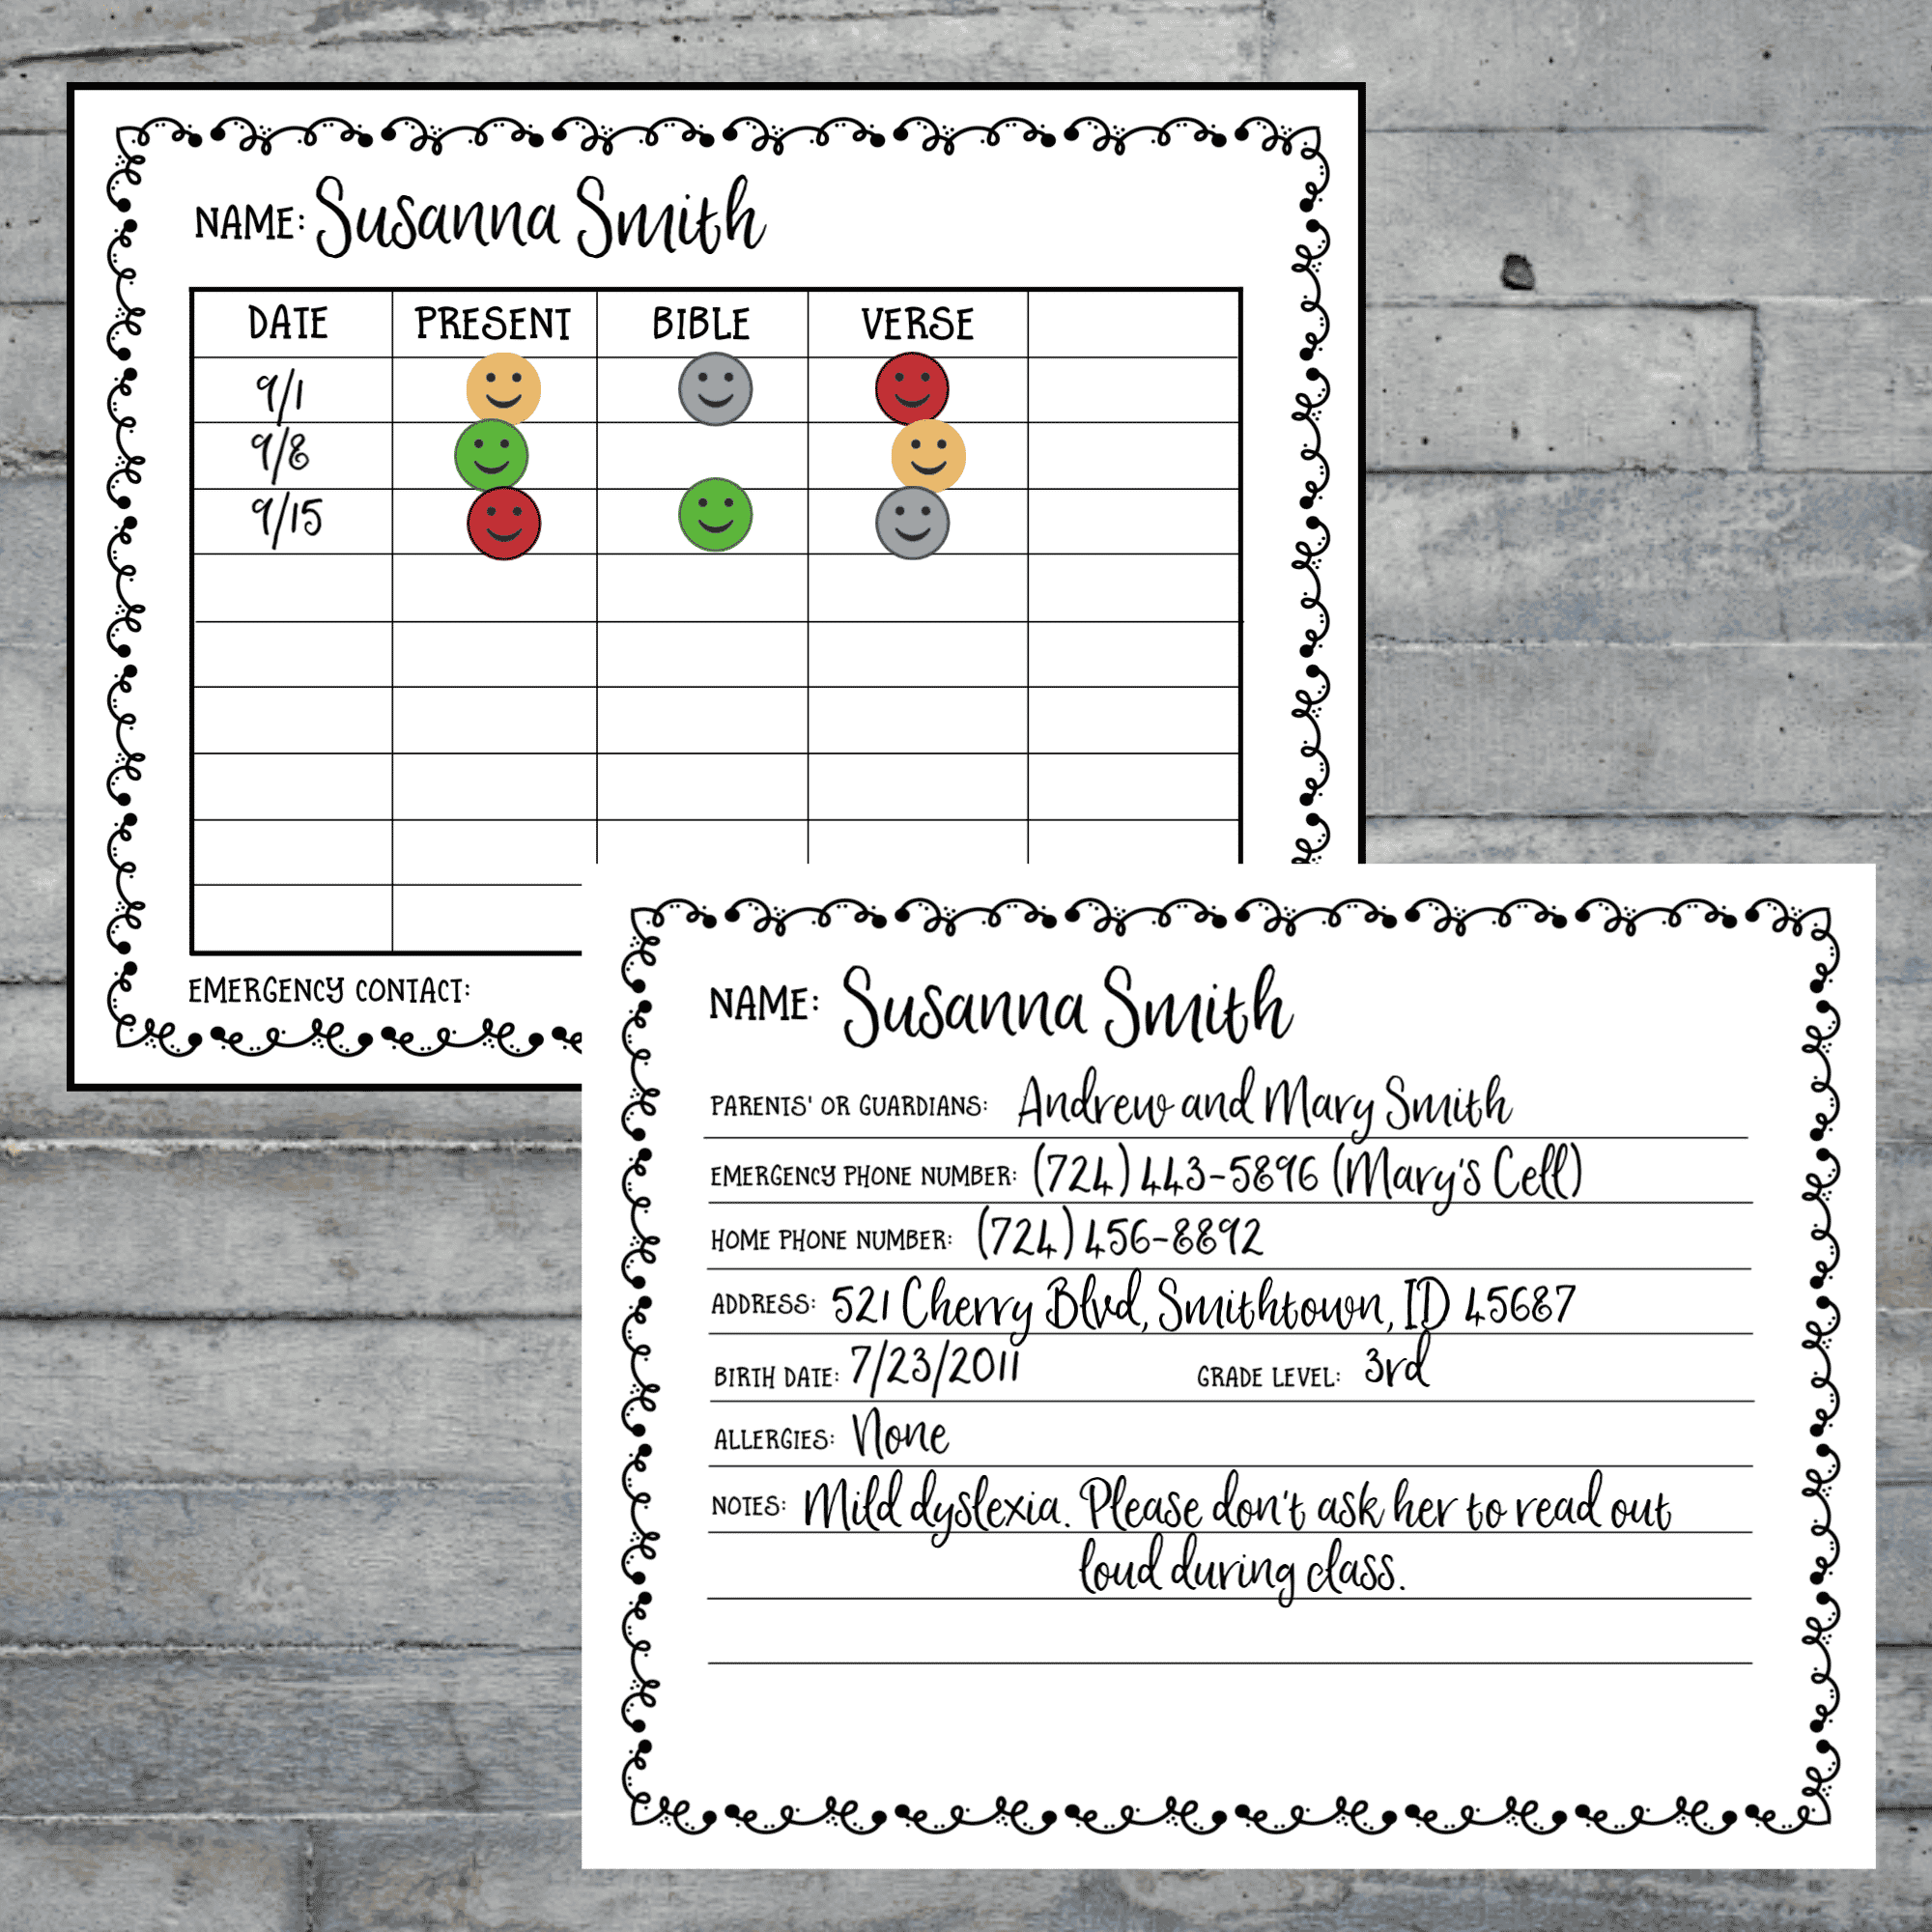 These printable Sunday School attendance cards are perfect for keeping track of attendance on the front and important student info on the back. I can't believe they're free. Best attendance cards I've seen.